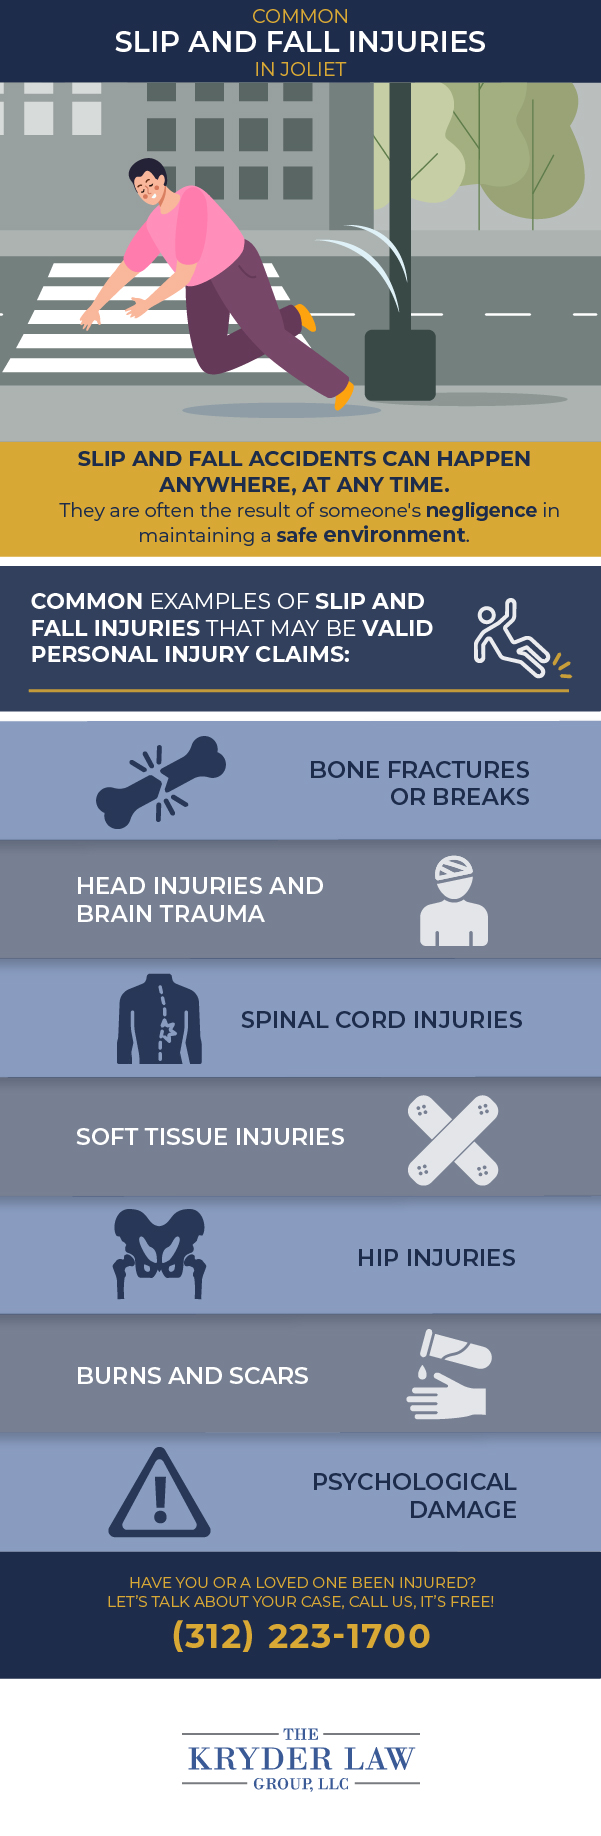 Common Slip and Fall Injuries in Joliet